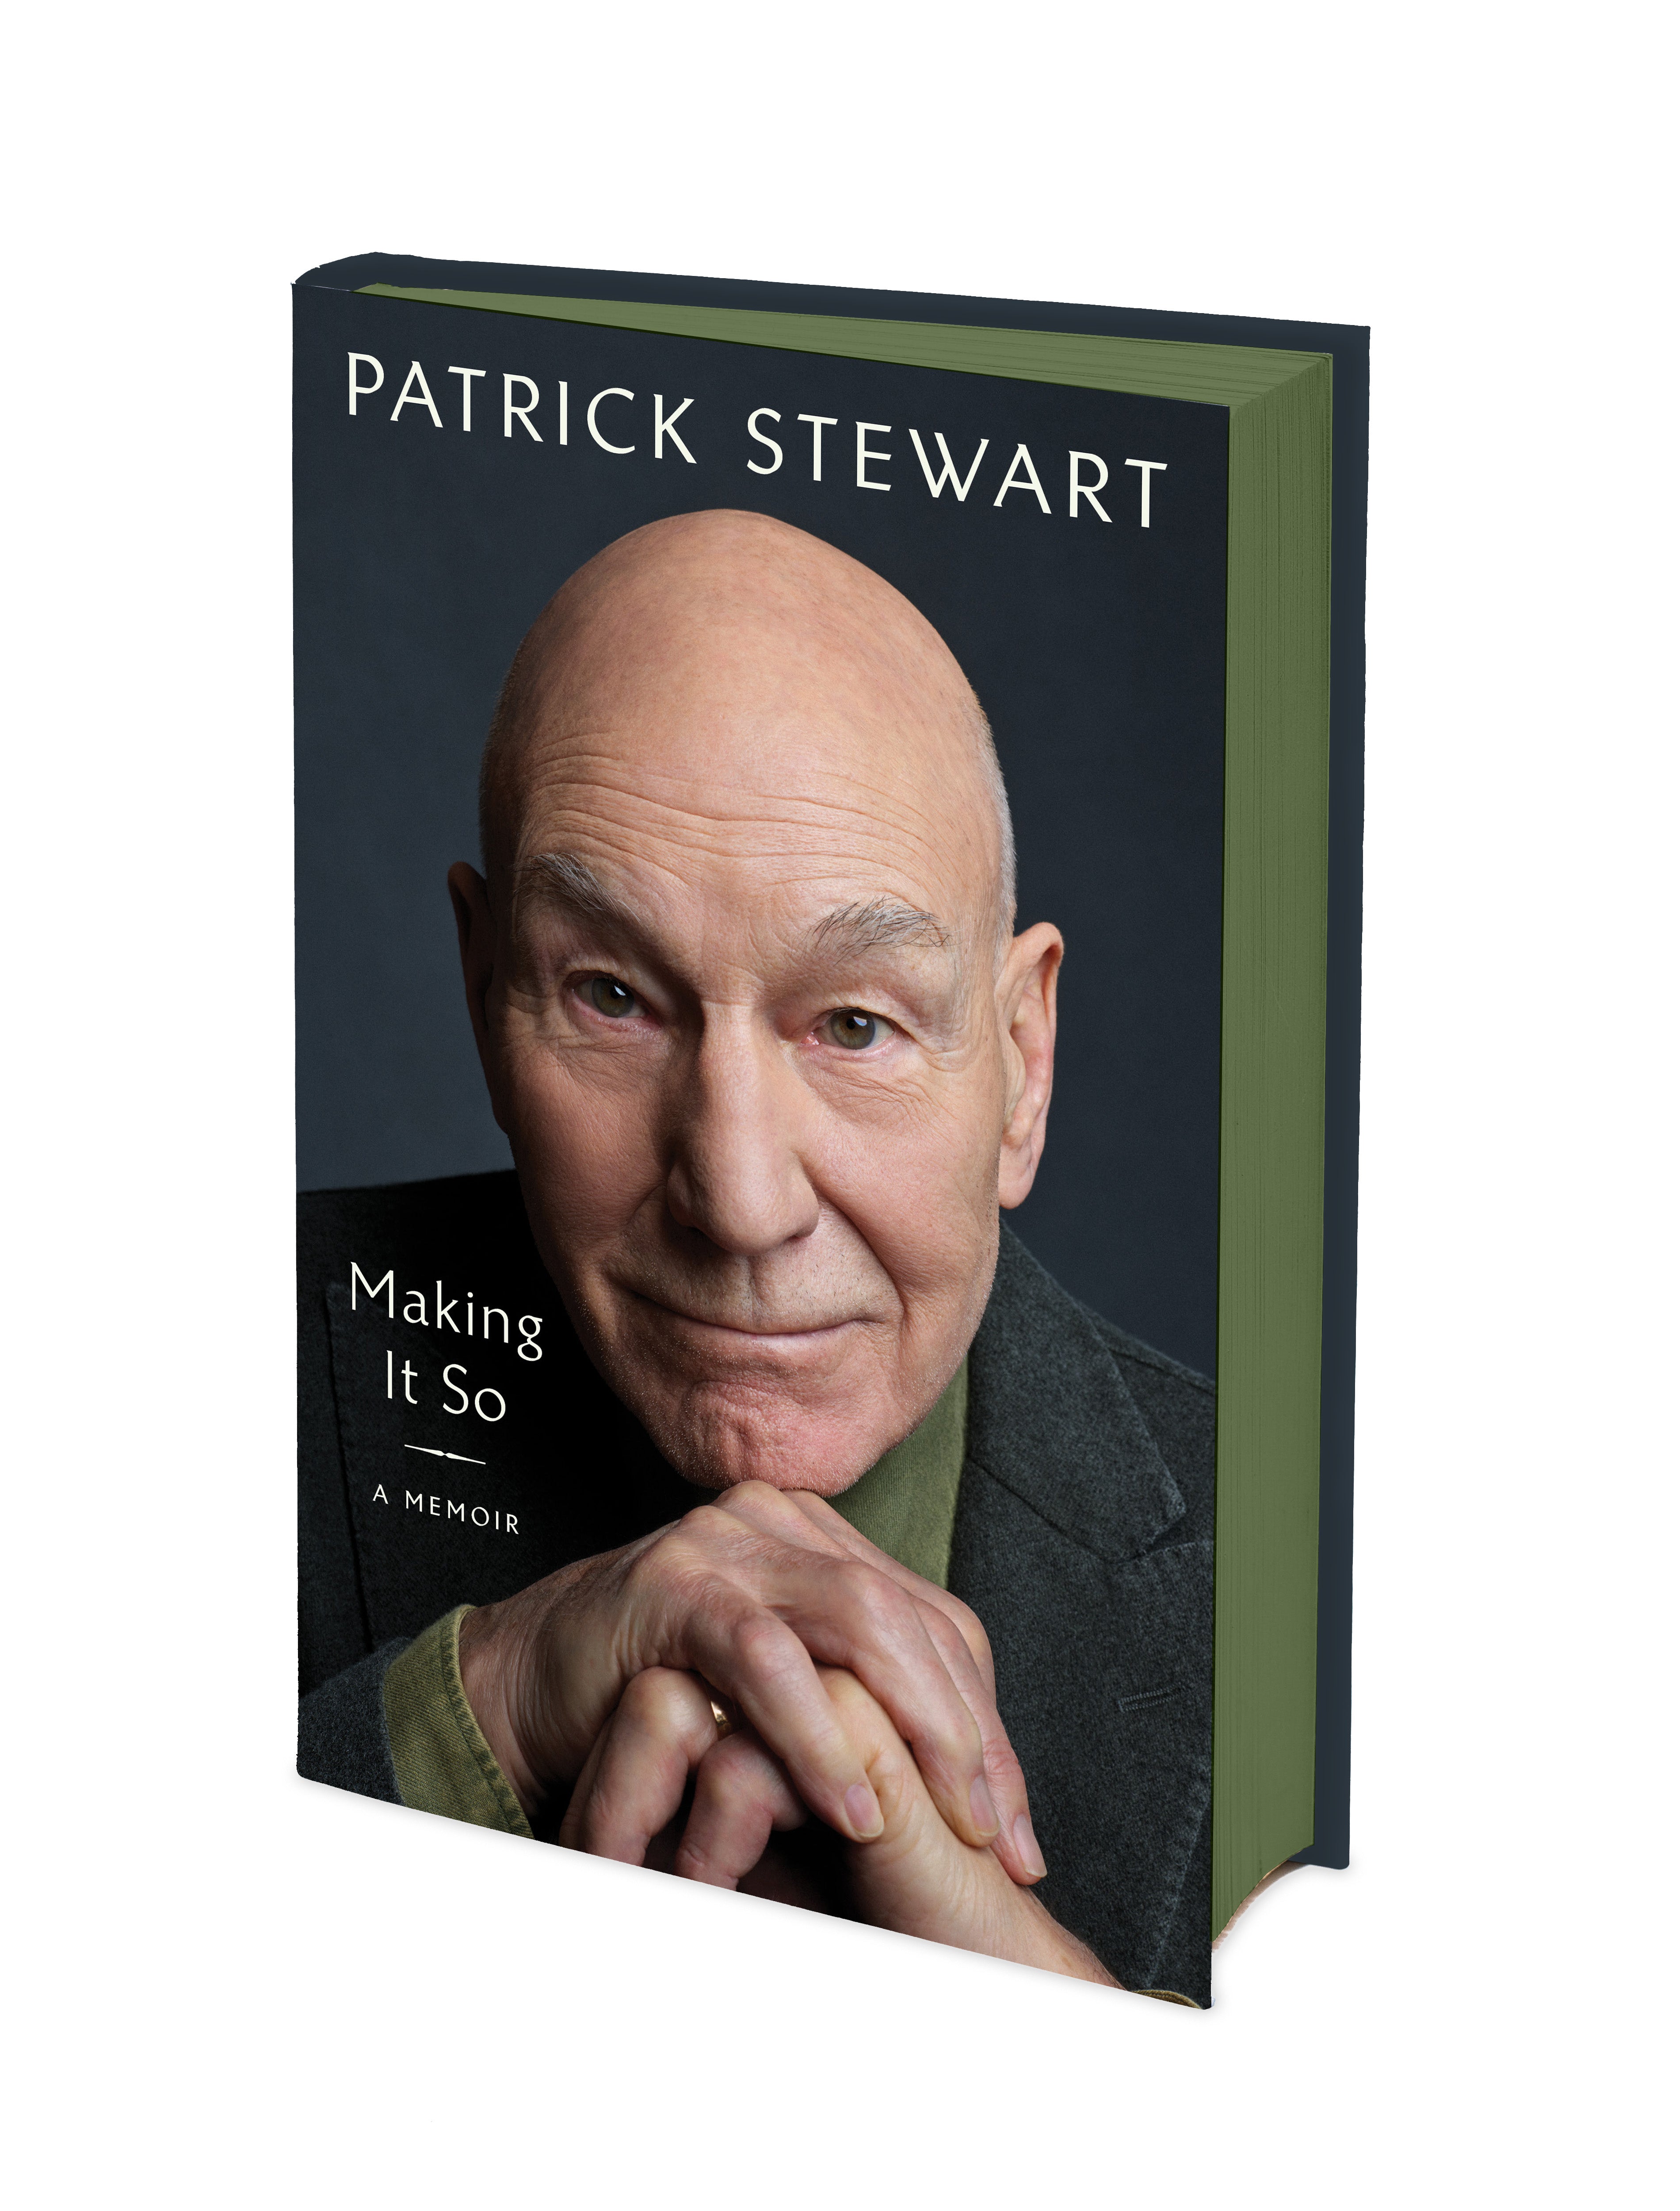 Making it So by Sir Patrick Stewart (Published on the 3rd of October)